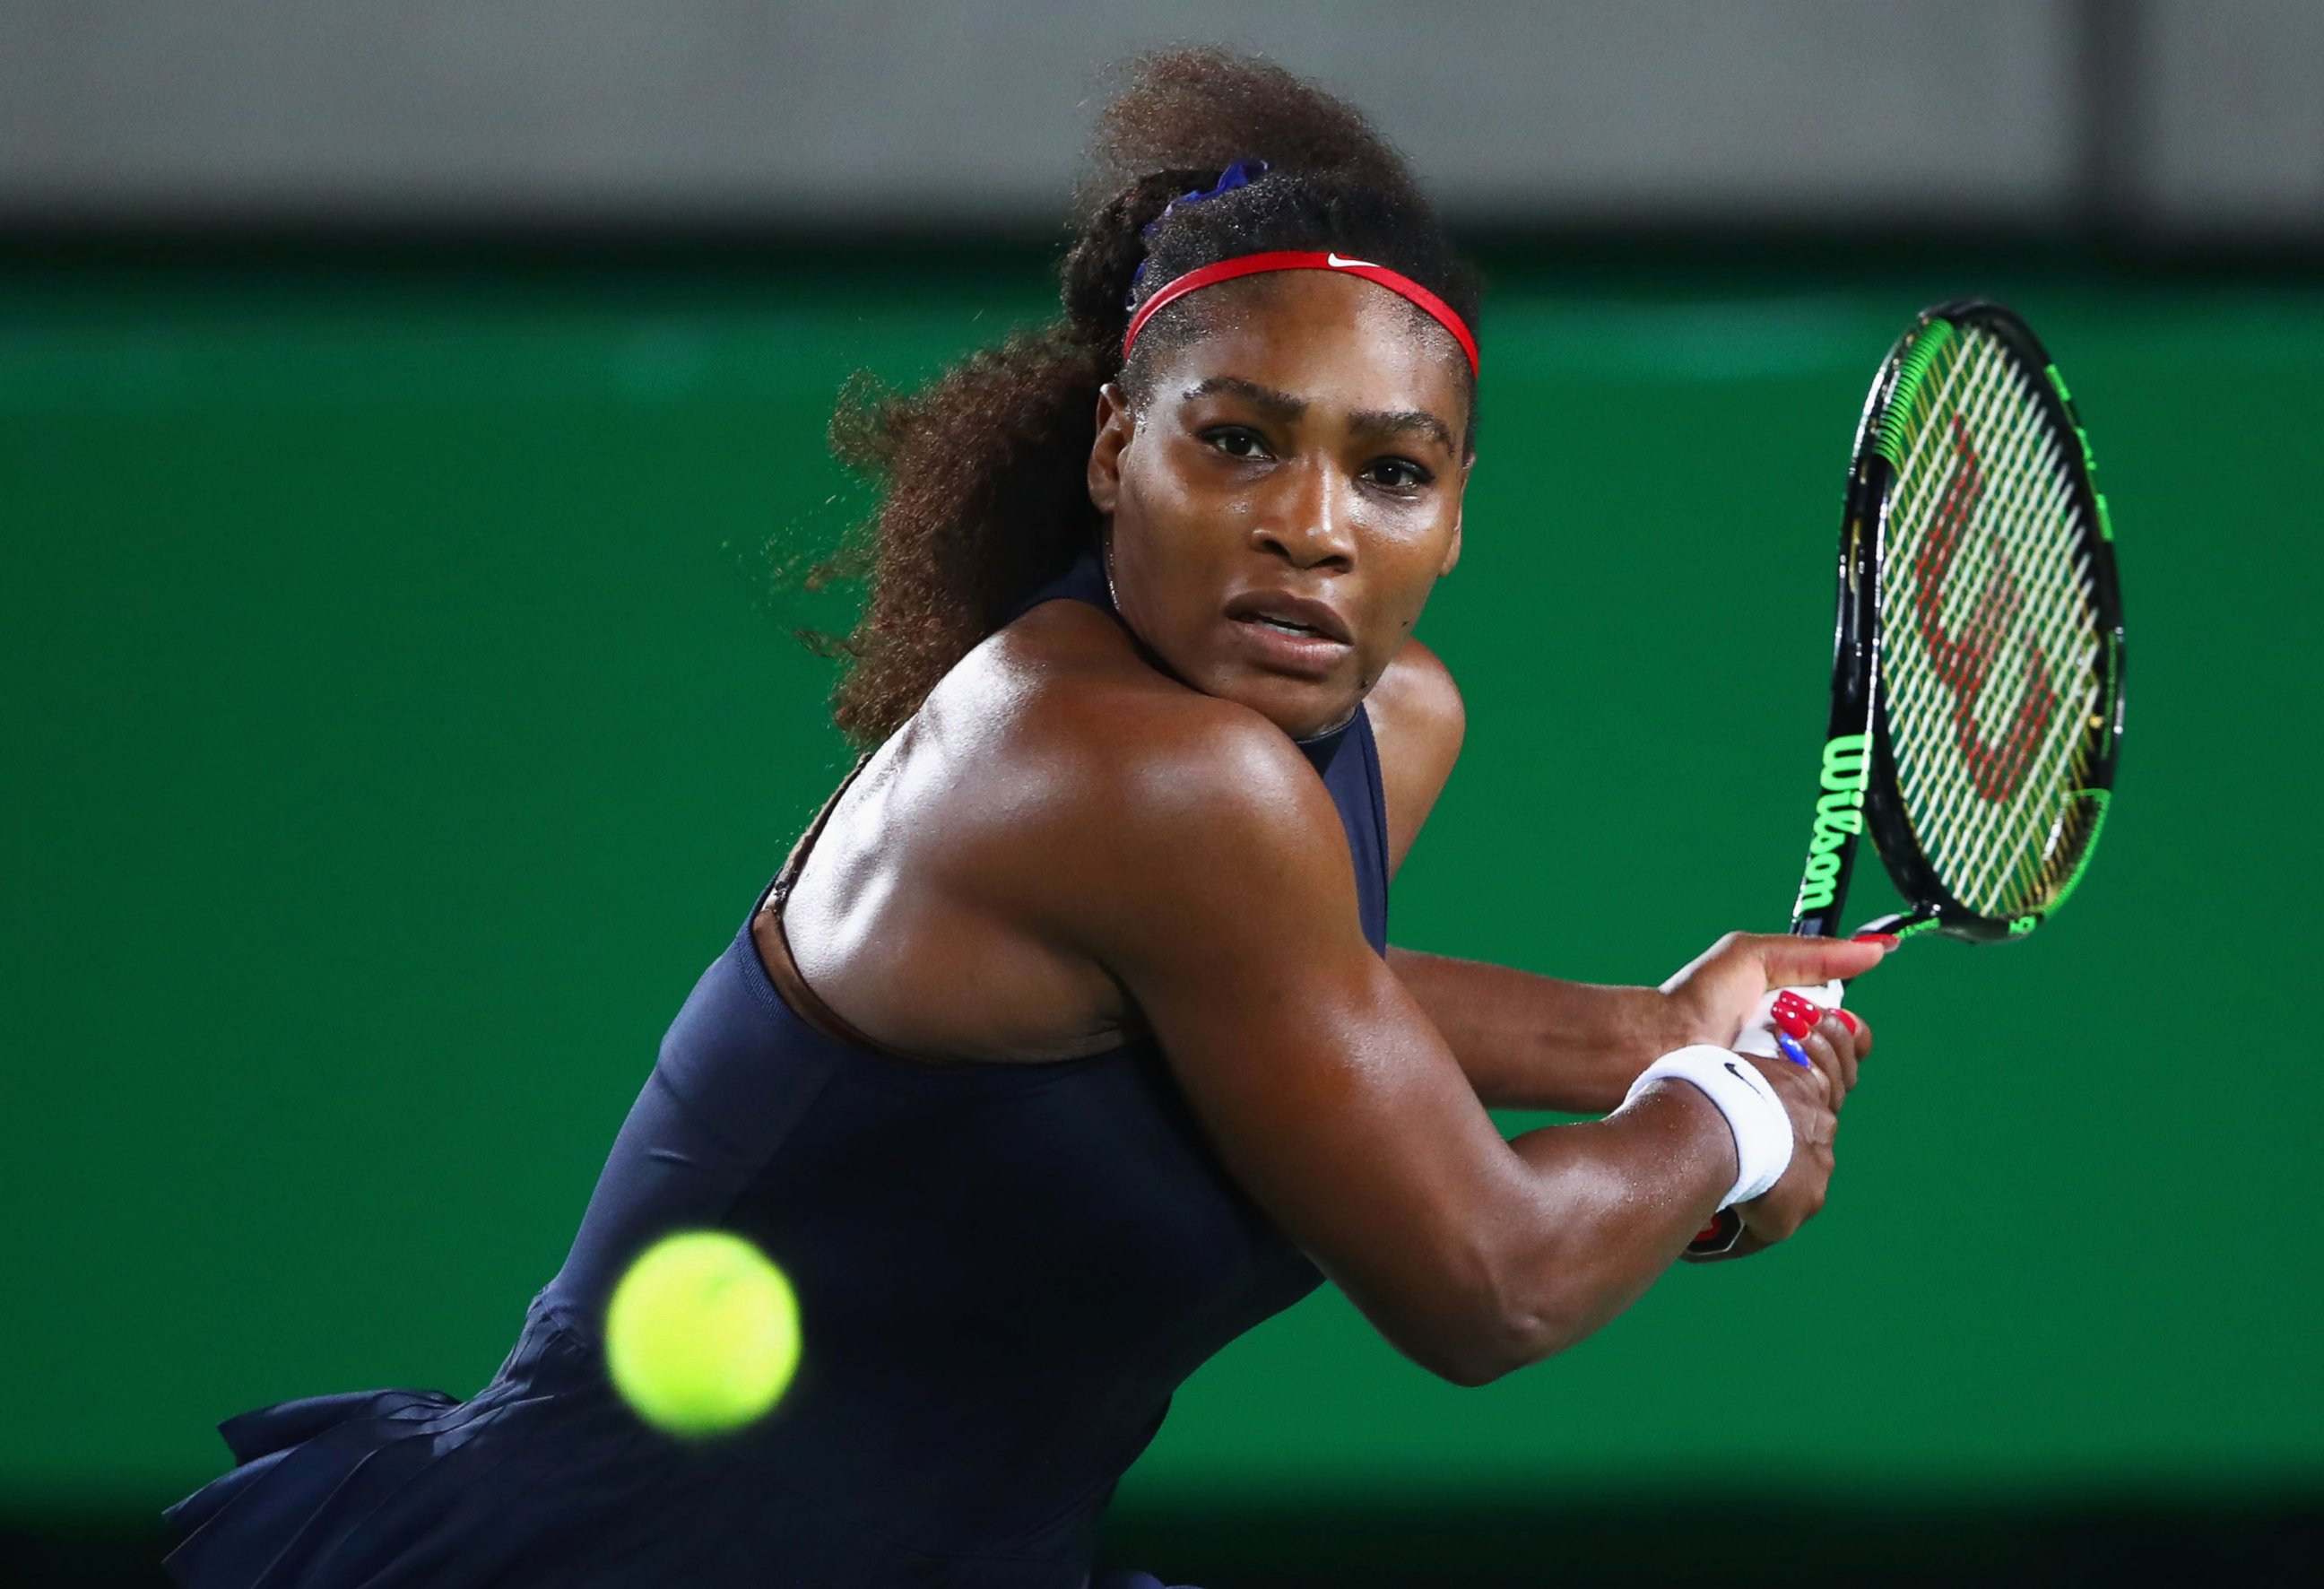 PHOTO: Serena Williams plays a backhand during the Women's Singles second round match against Alize Cornet of France on Day 3 of the Rio 2016 Olympic Games at the Olympic Tennis Centre on Aug. 8, 2016 in Rio de Janeiro.